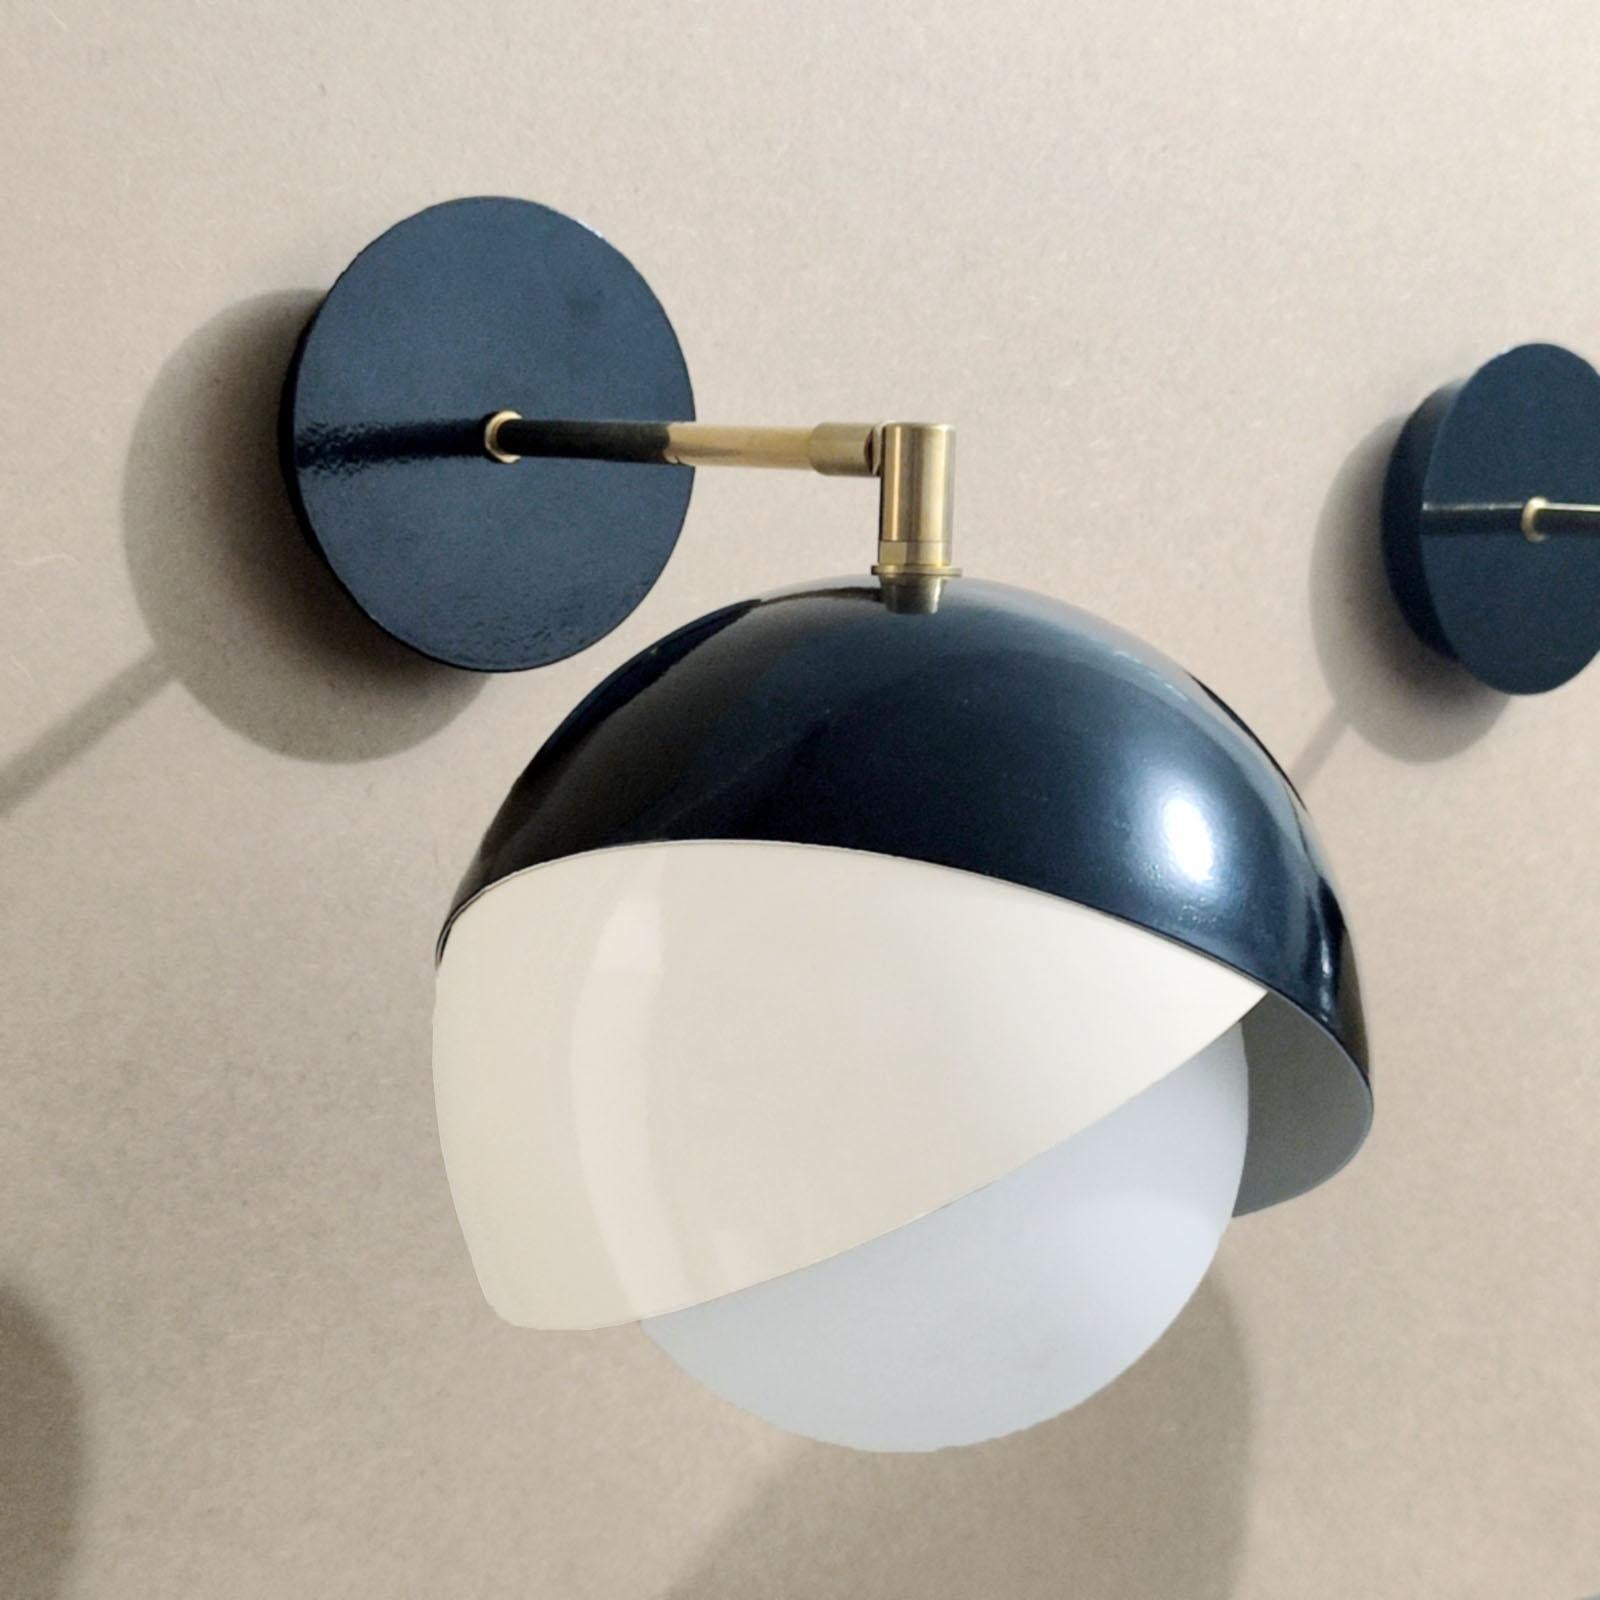 European Pair of Italian Brass, Black Lacquer and Satin Glass Adjustable Wall Lights For Sale